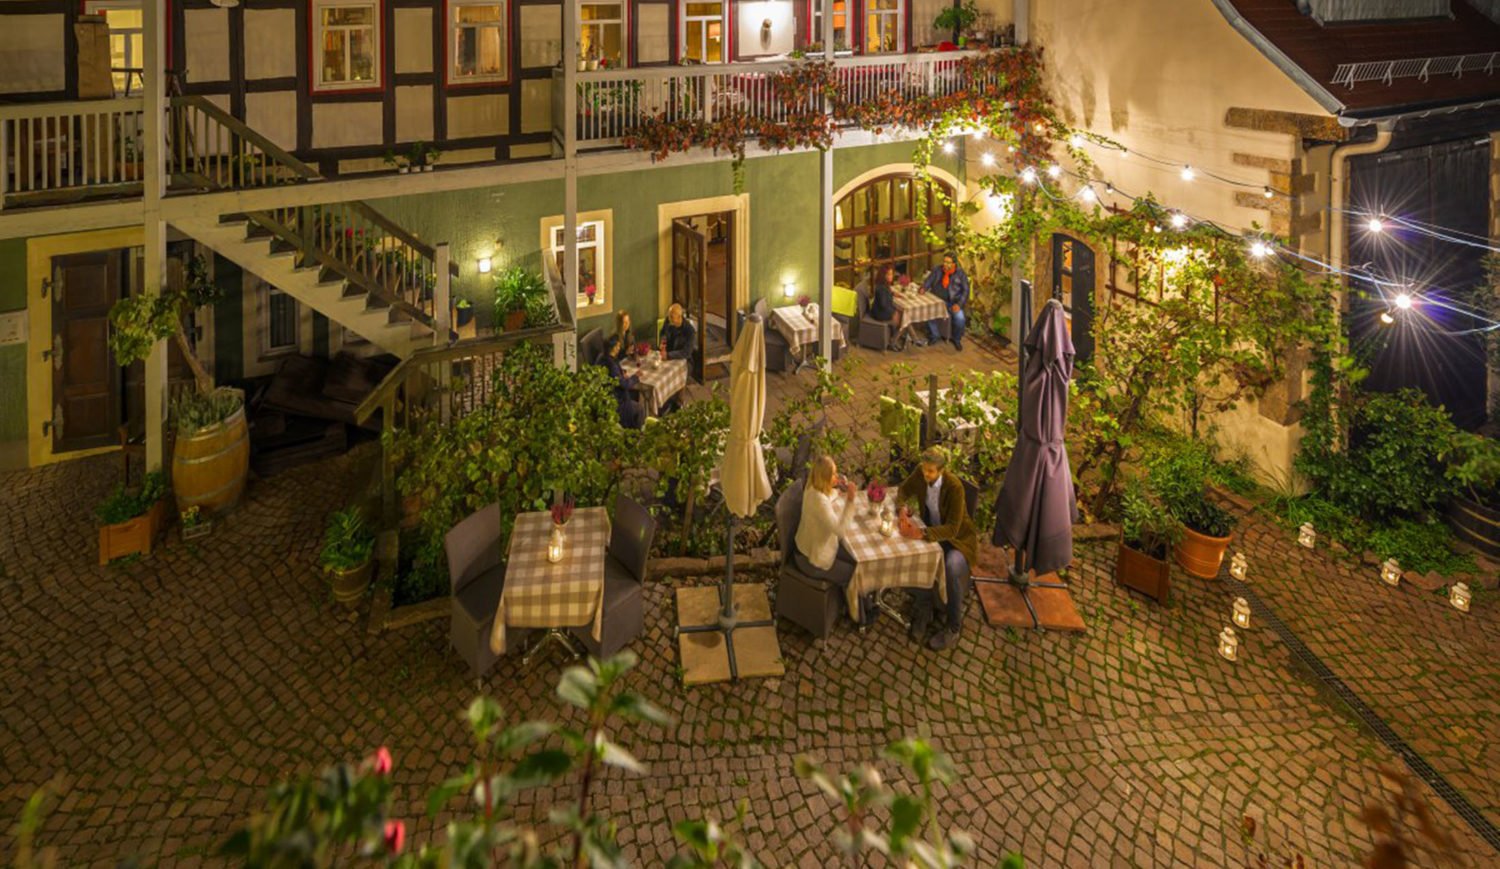 A guarantee for a cozy evening - the wine-lined courtyard garden